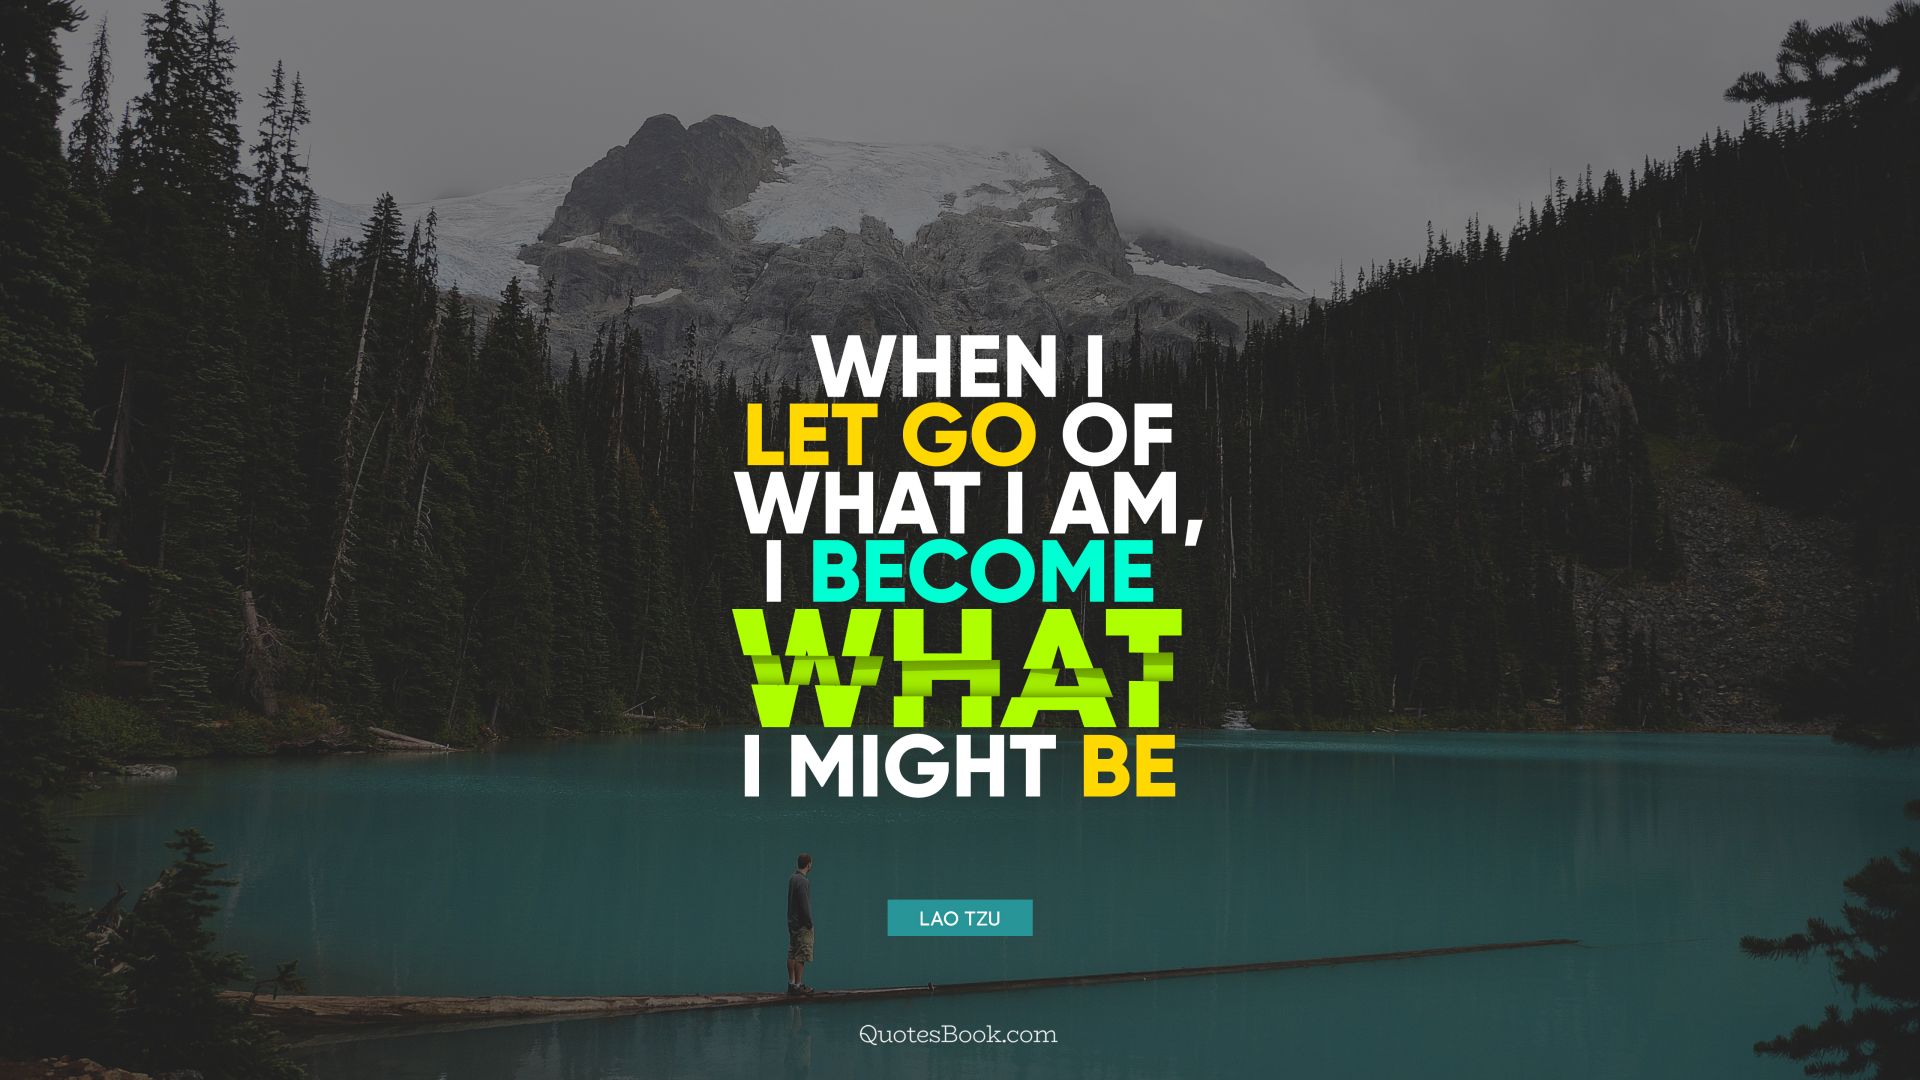 When I let go of what I am, I become what I might be. - Quote by Lao Tzu